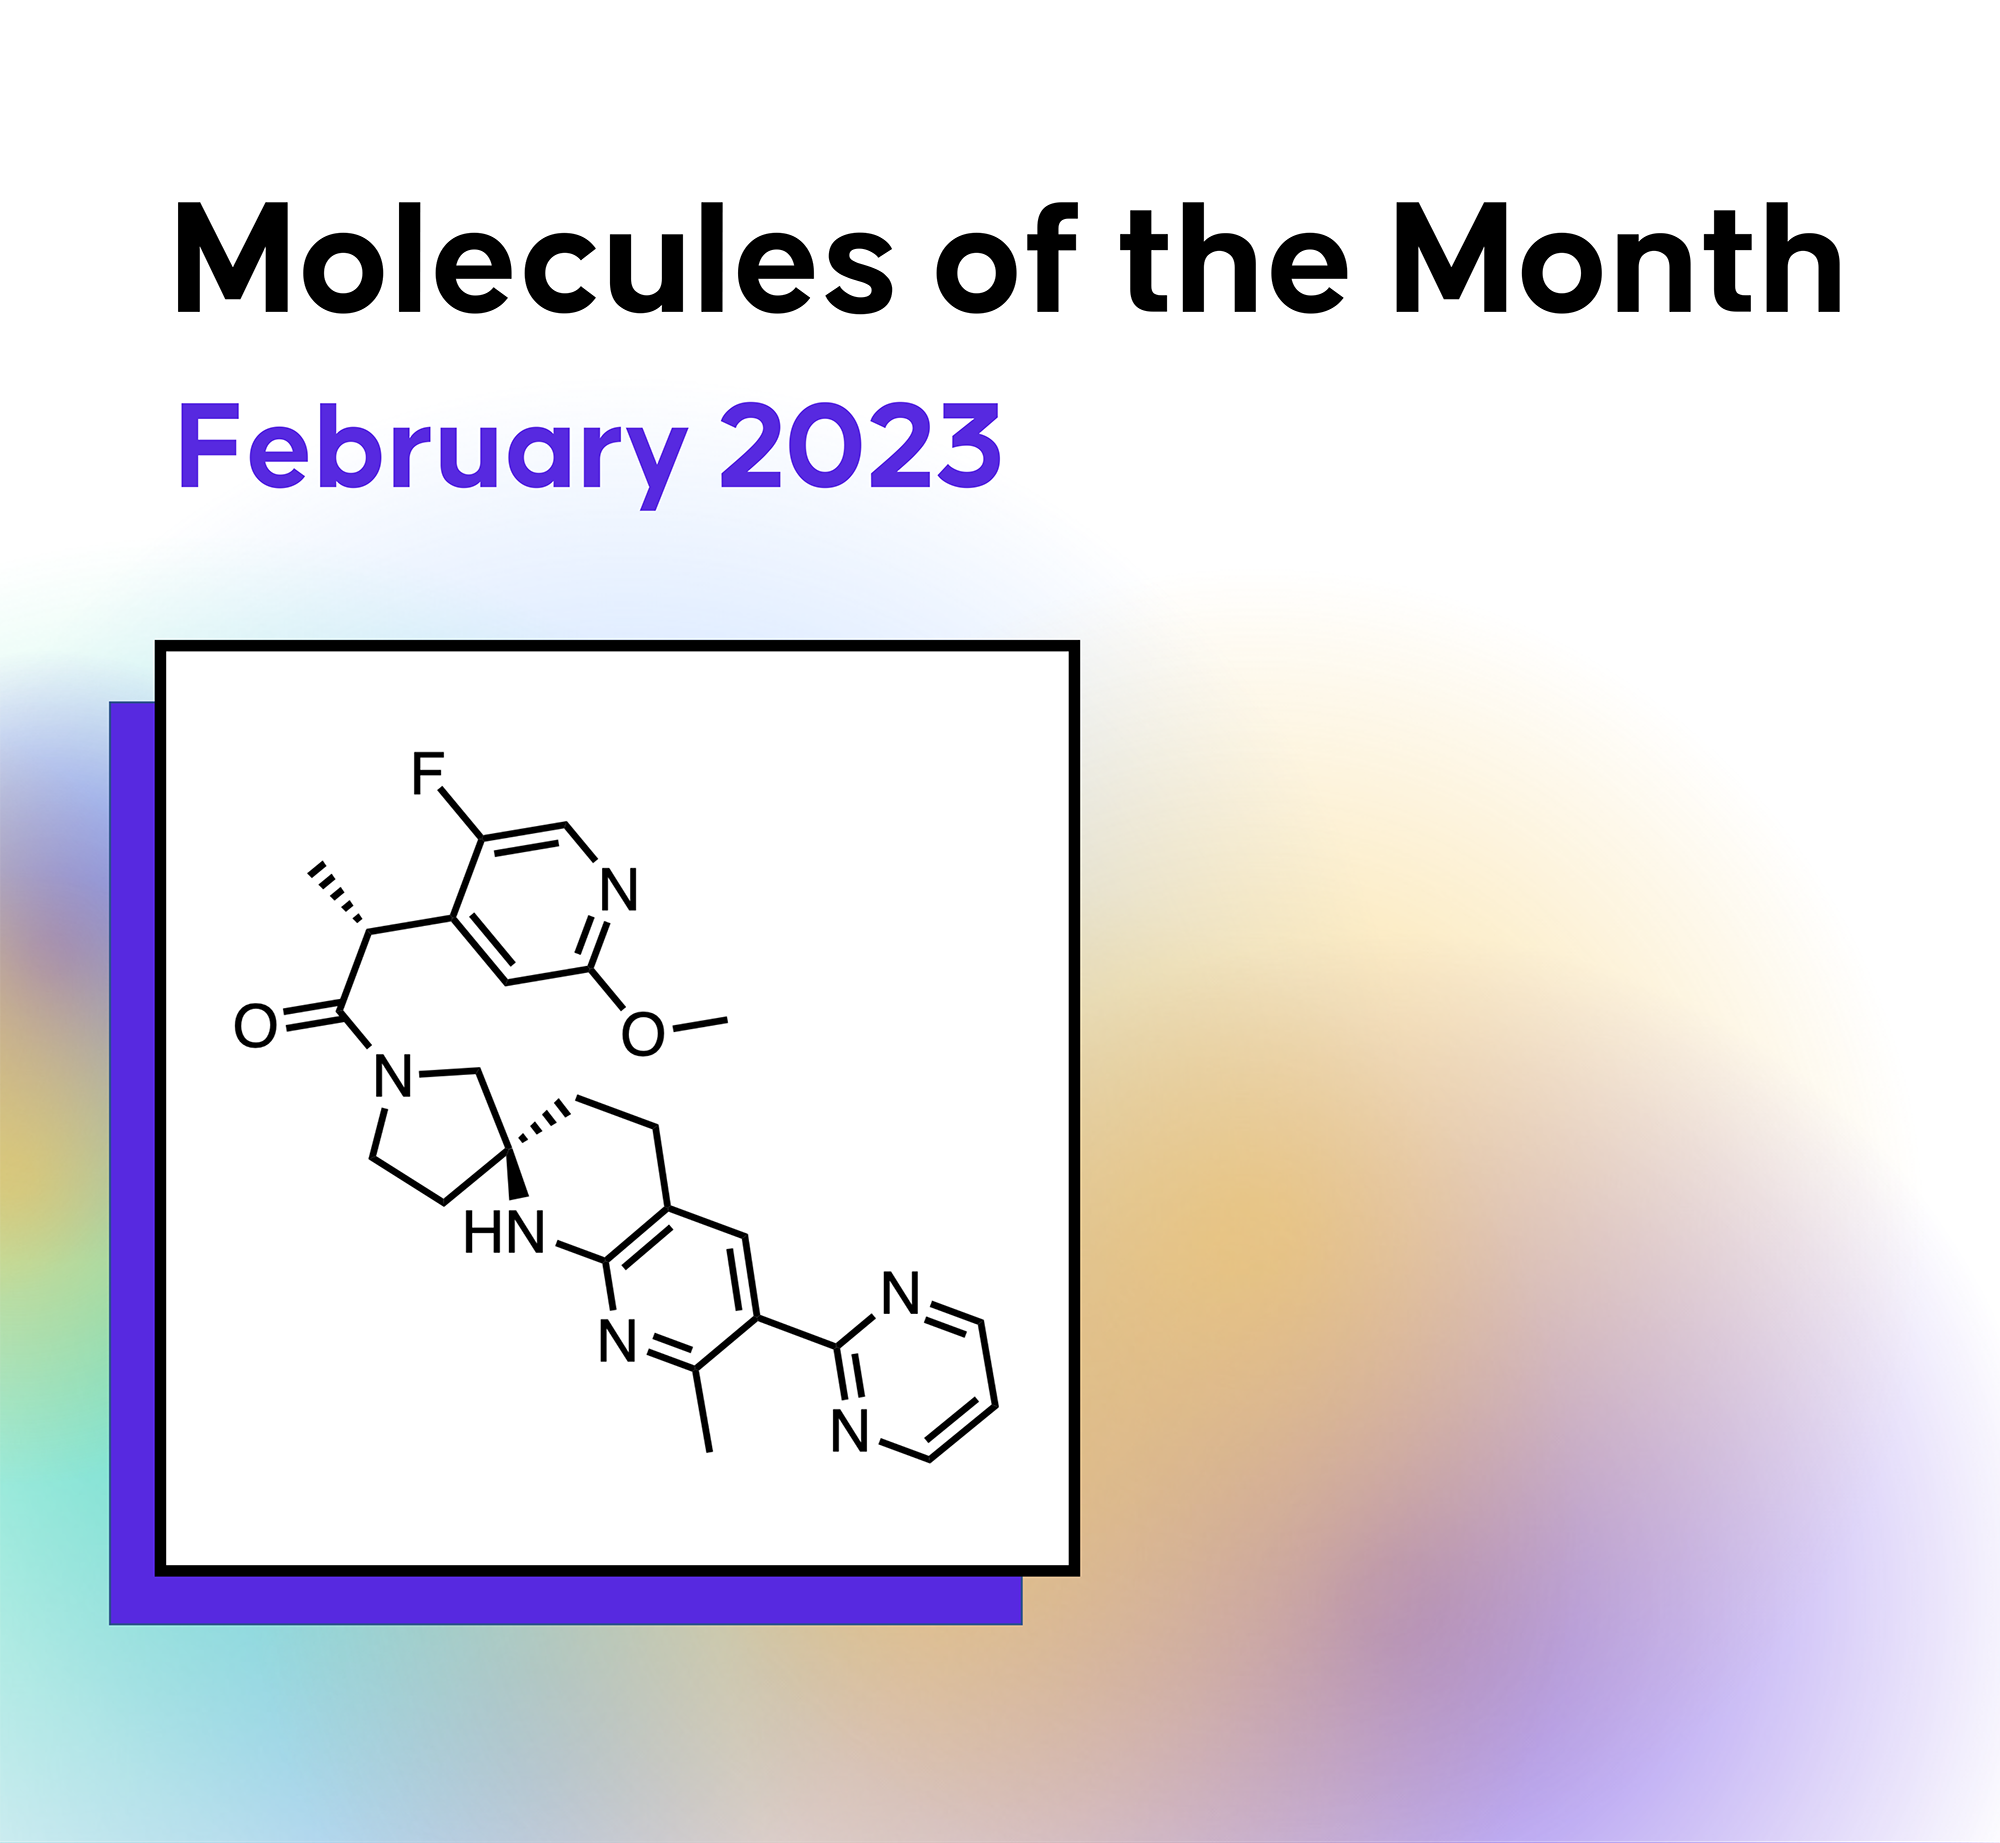 Molecules of the Month - February 2023, structure of PF-07258669